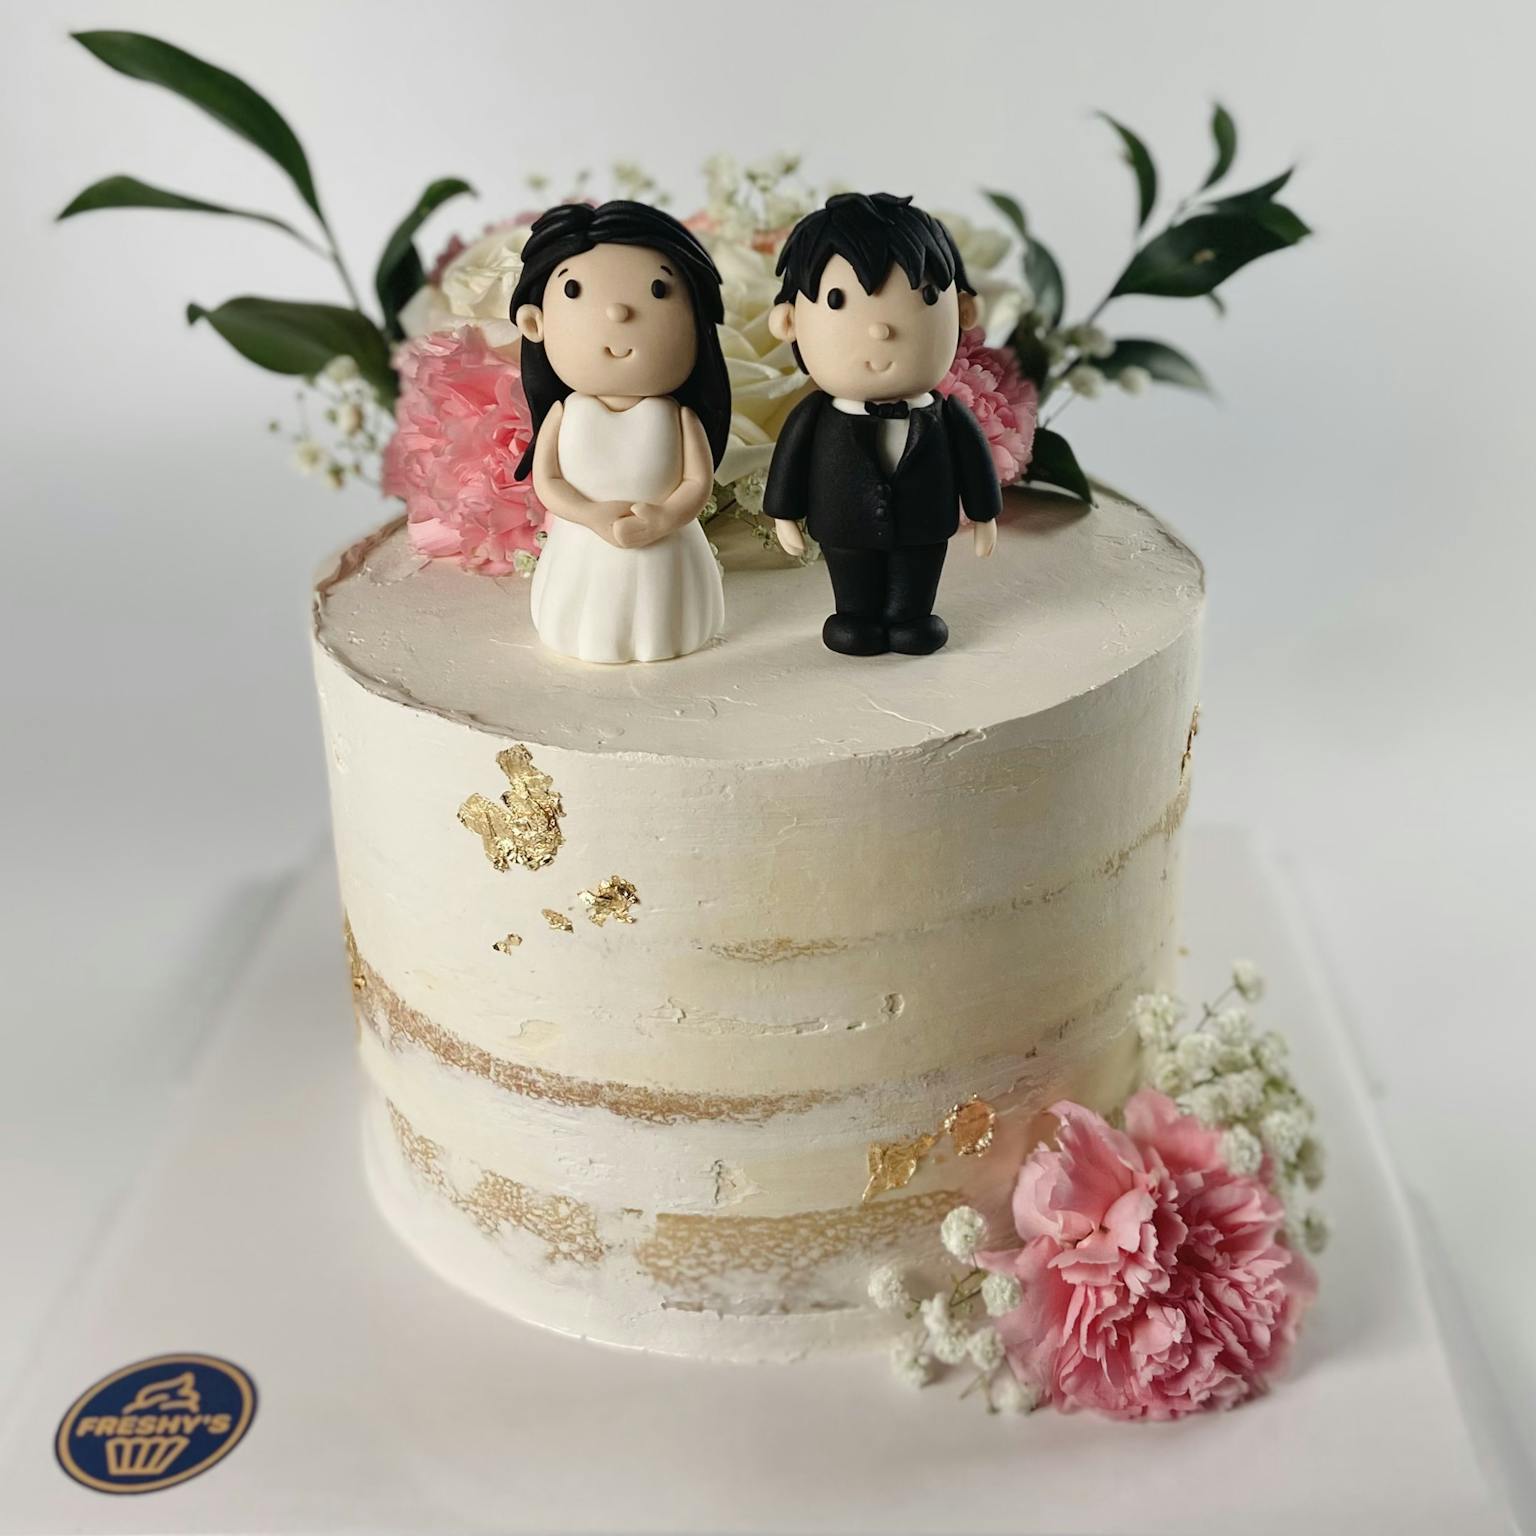 Fondant sculpted wedding cake with couple on top